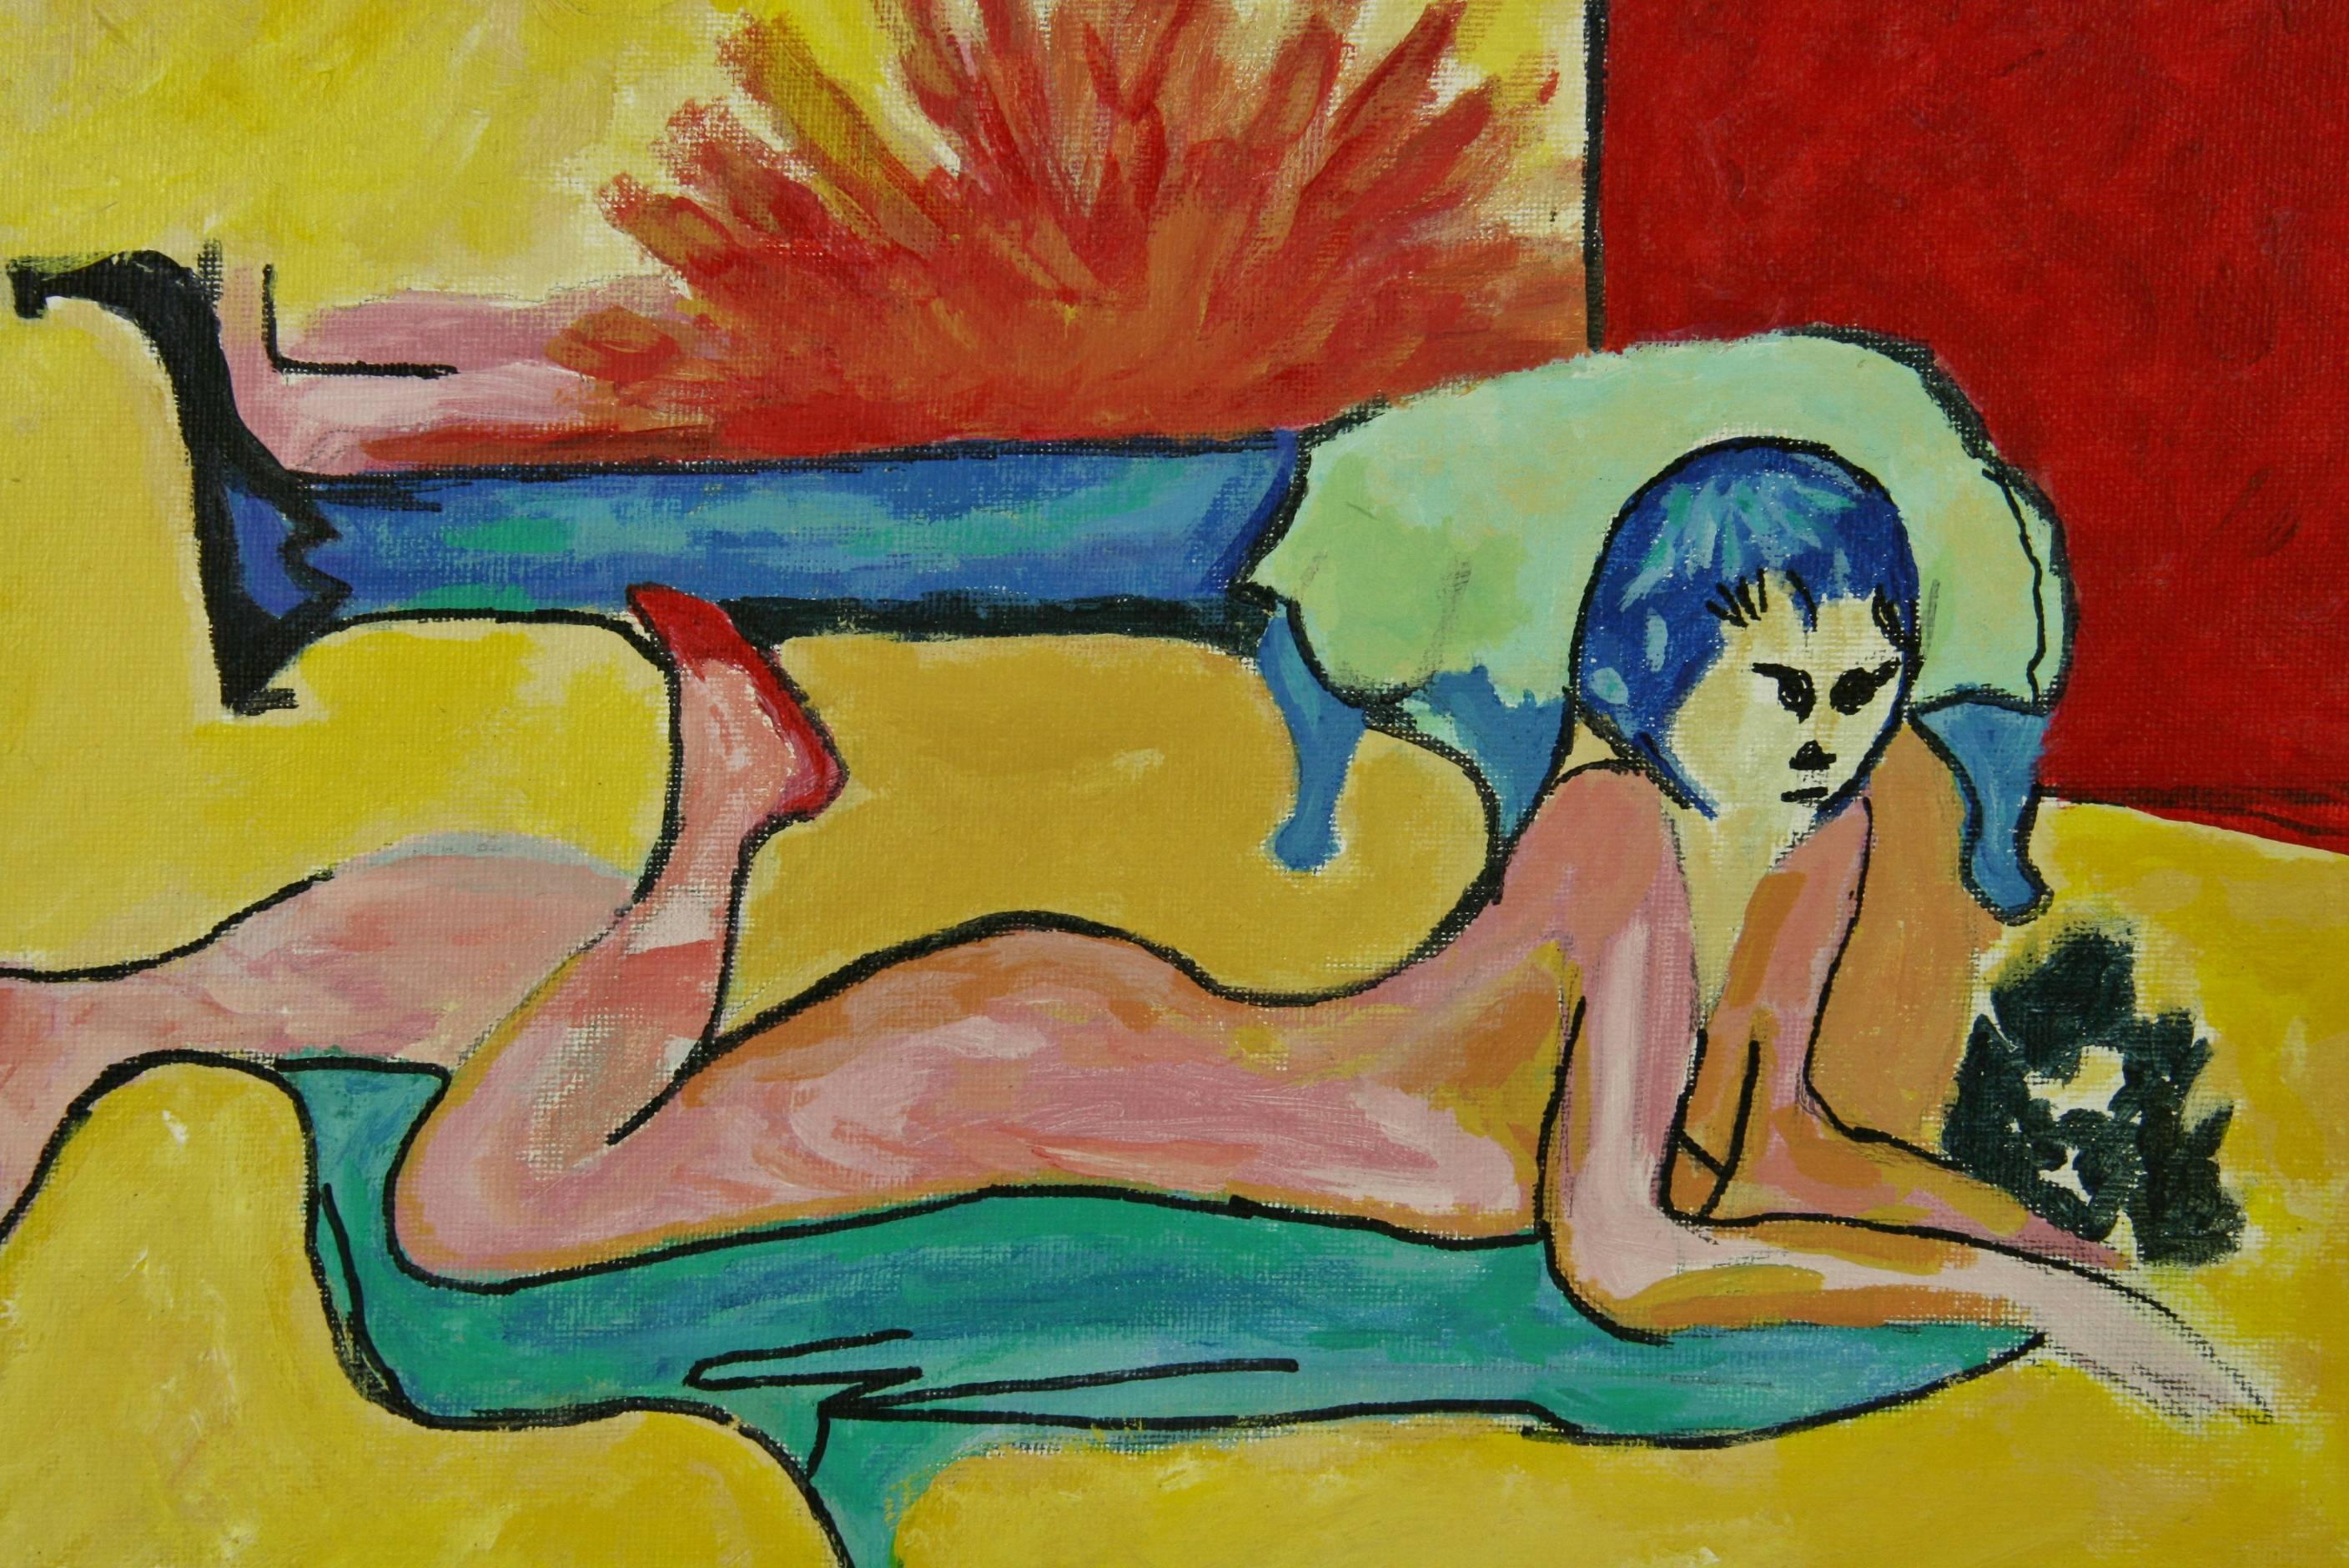 5-2938 Figurative painting of a resting girl.
Acrylic on artist board in a wood frame
Image size 10.5 H x 12